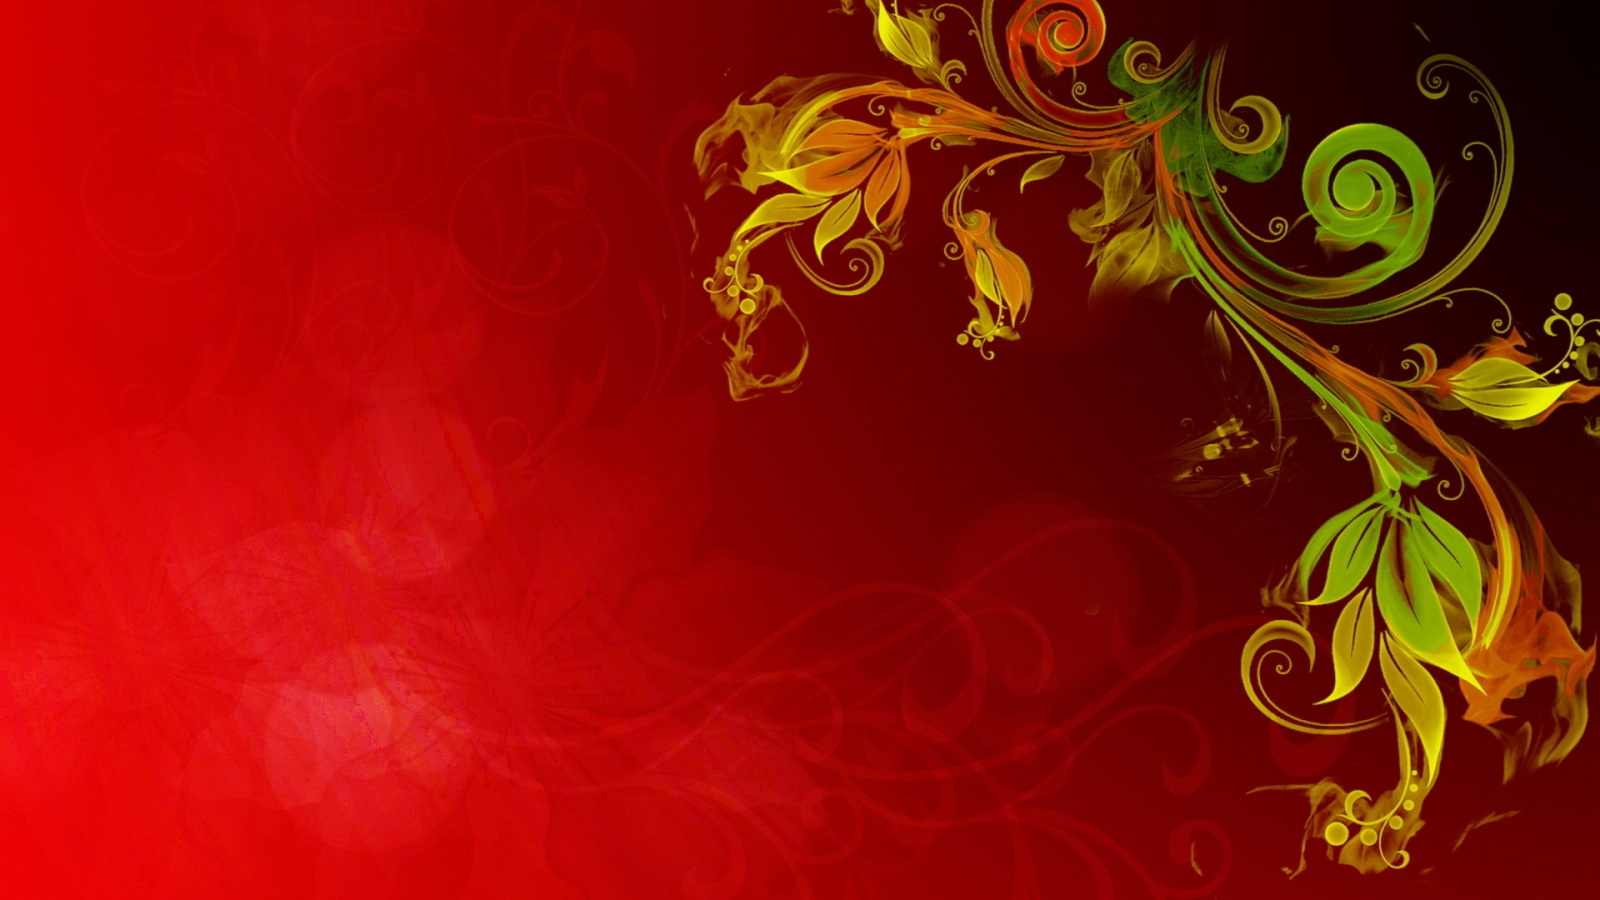 Abstract Swirls Windows Theme And Wallpaper All For